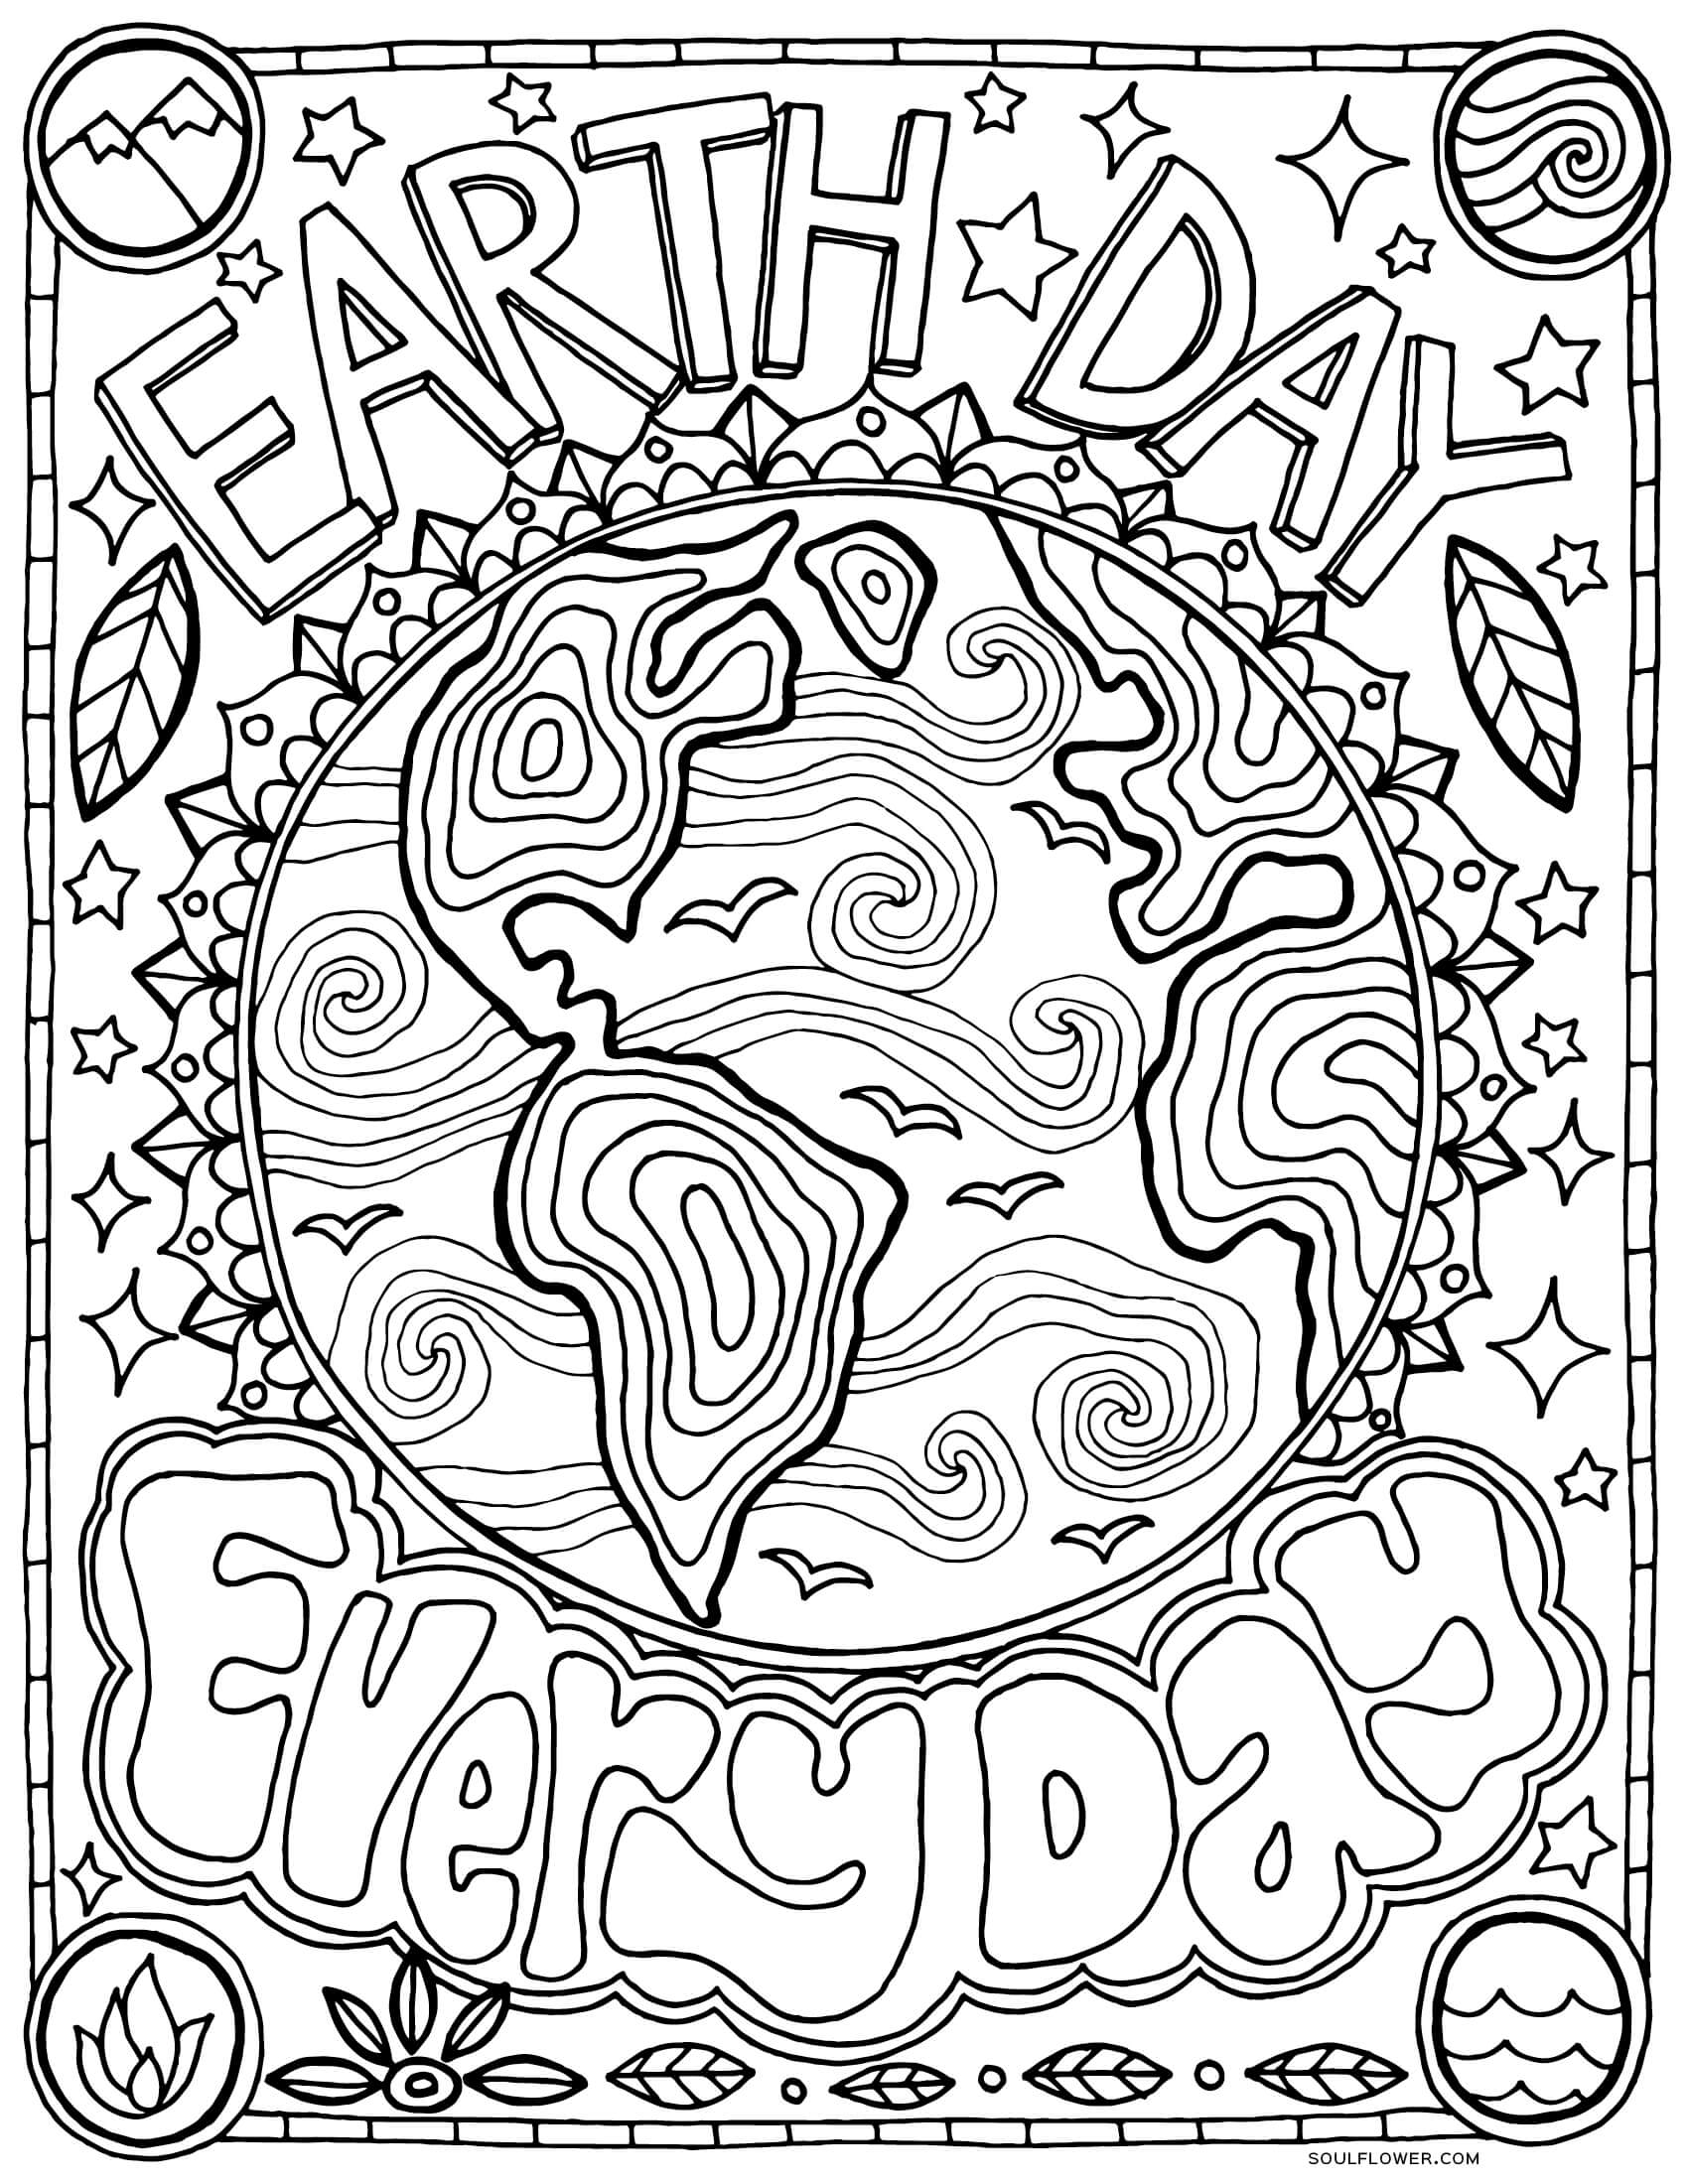 free-coloring-pages-for-earth-day